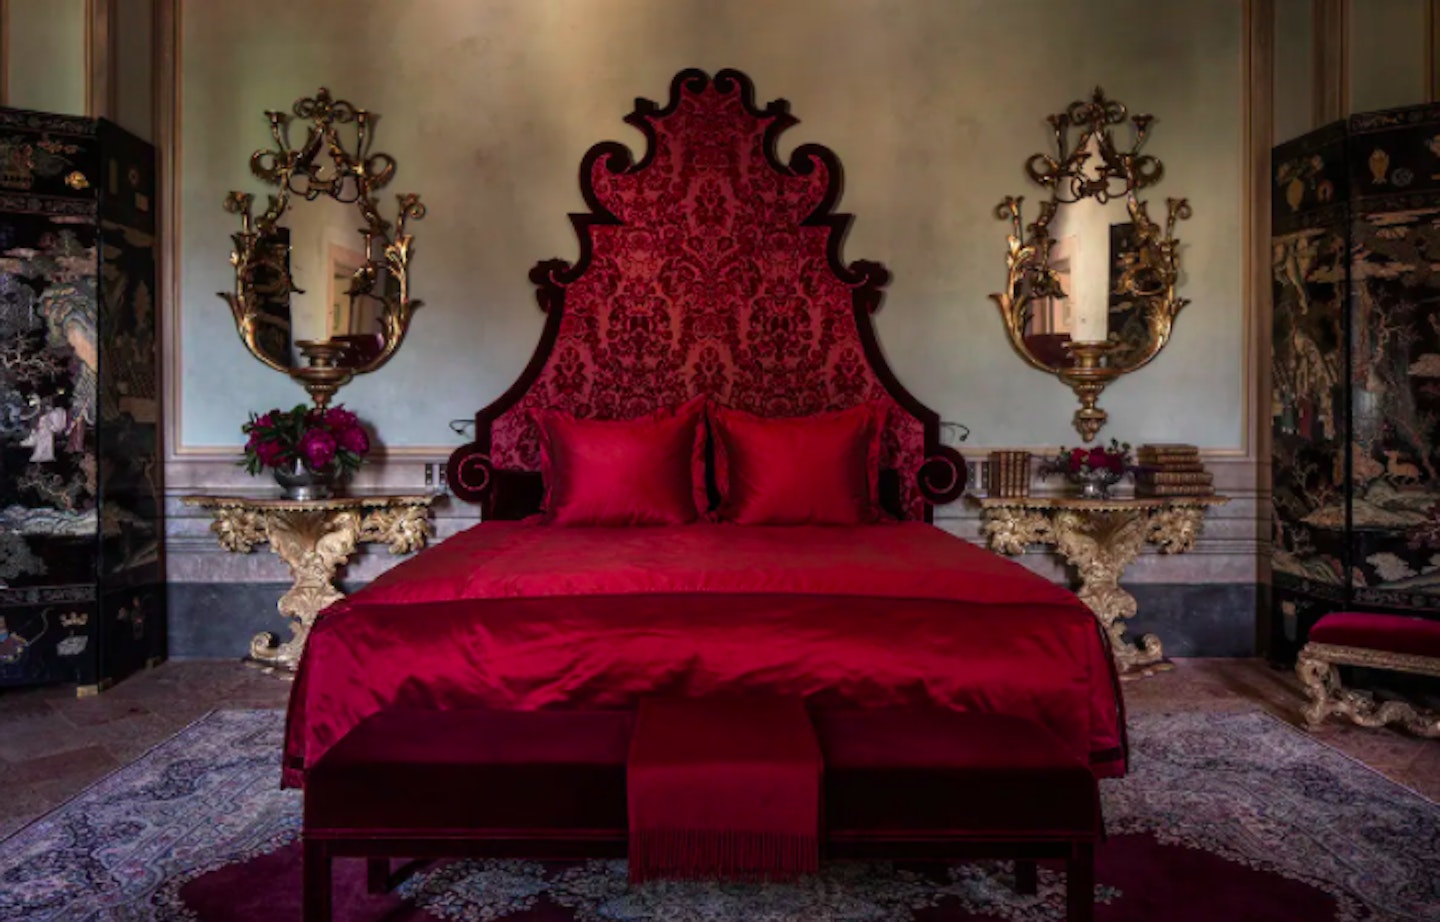 House of Gucci on Airbnb - Grazia